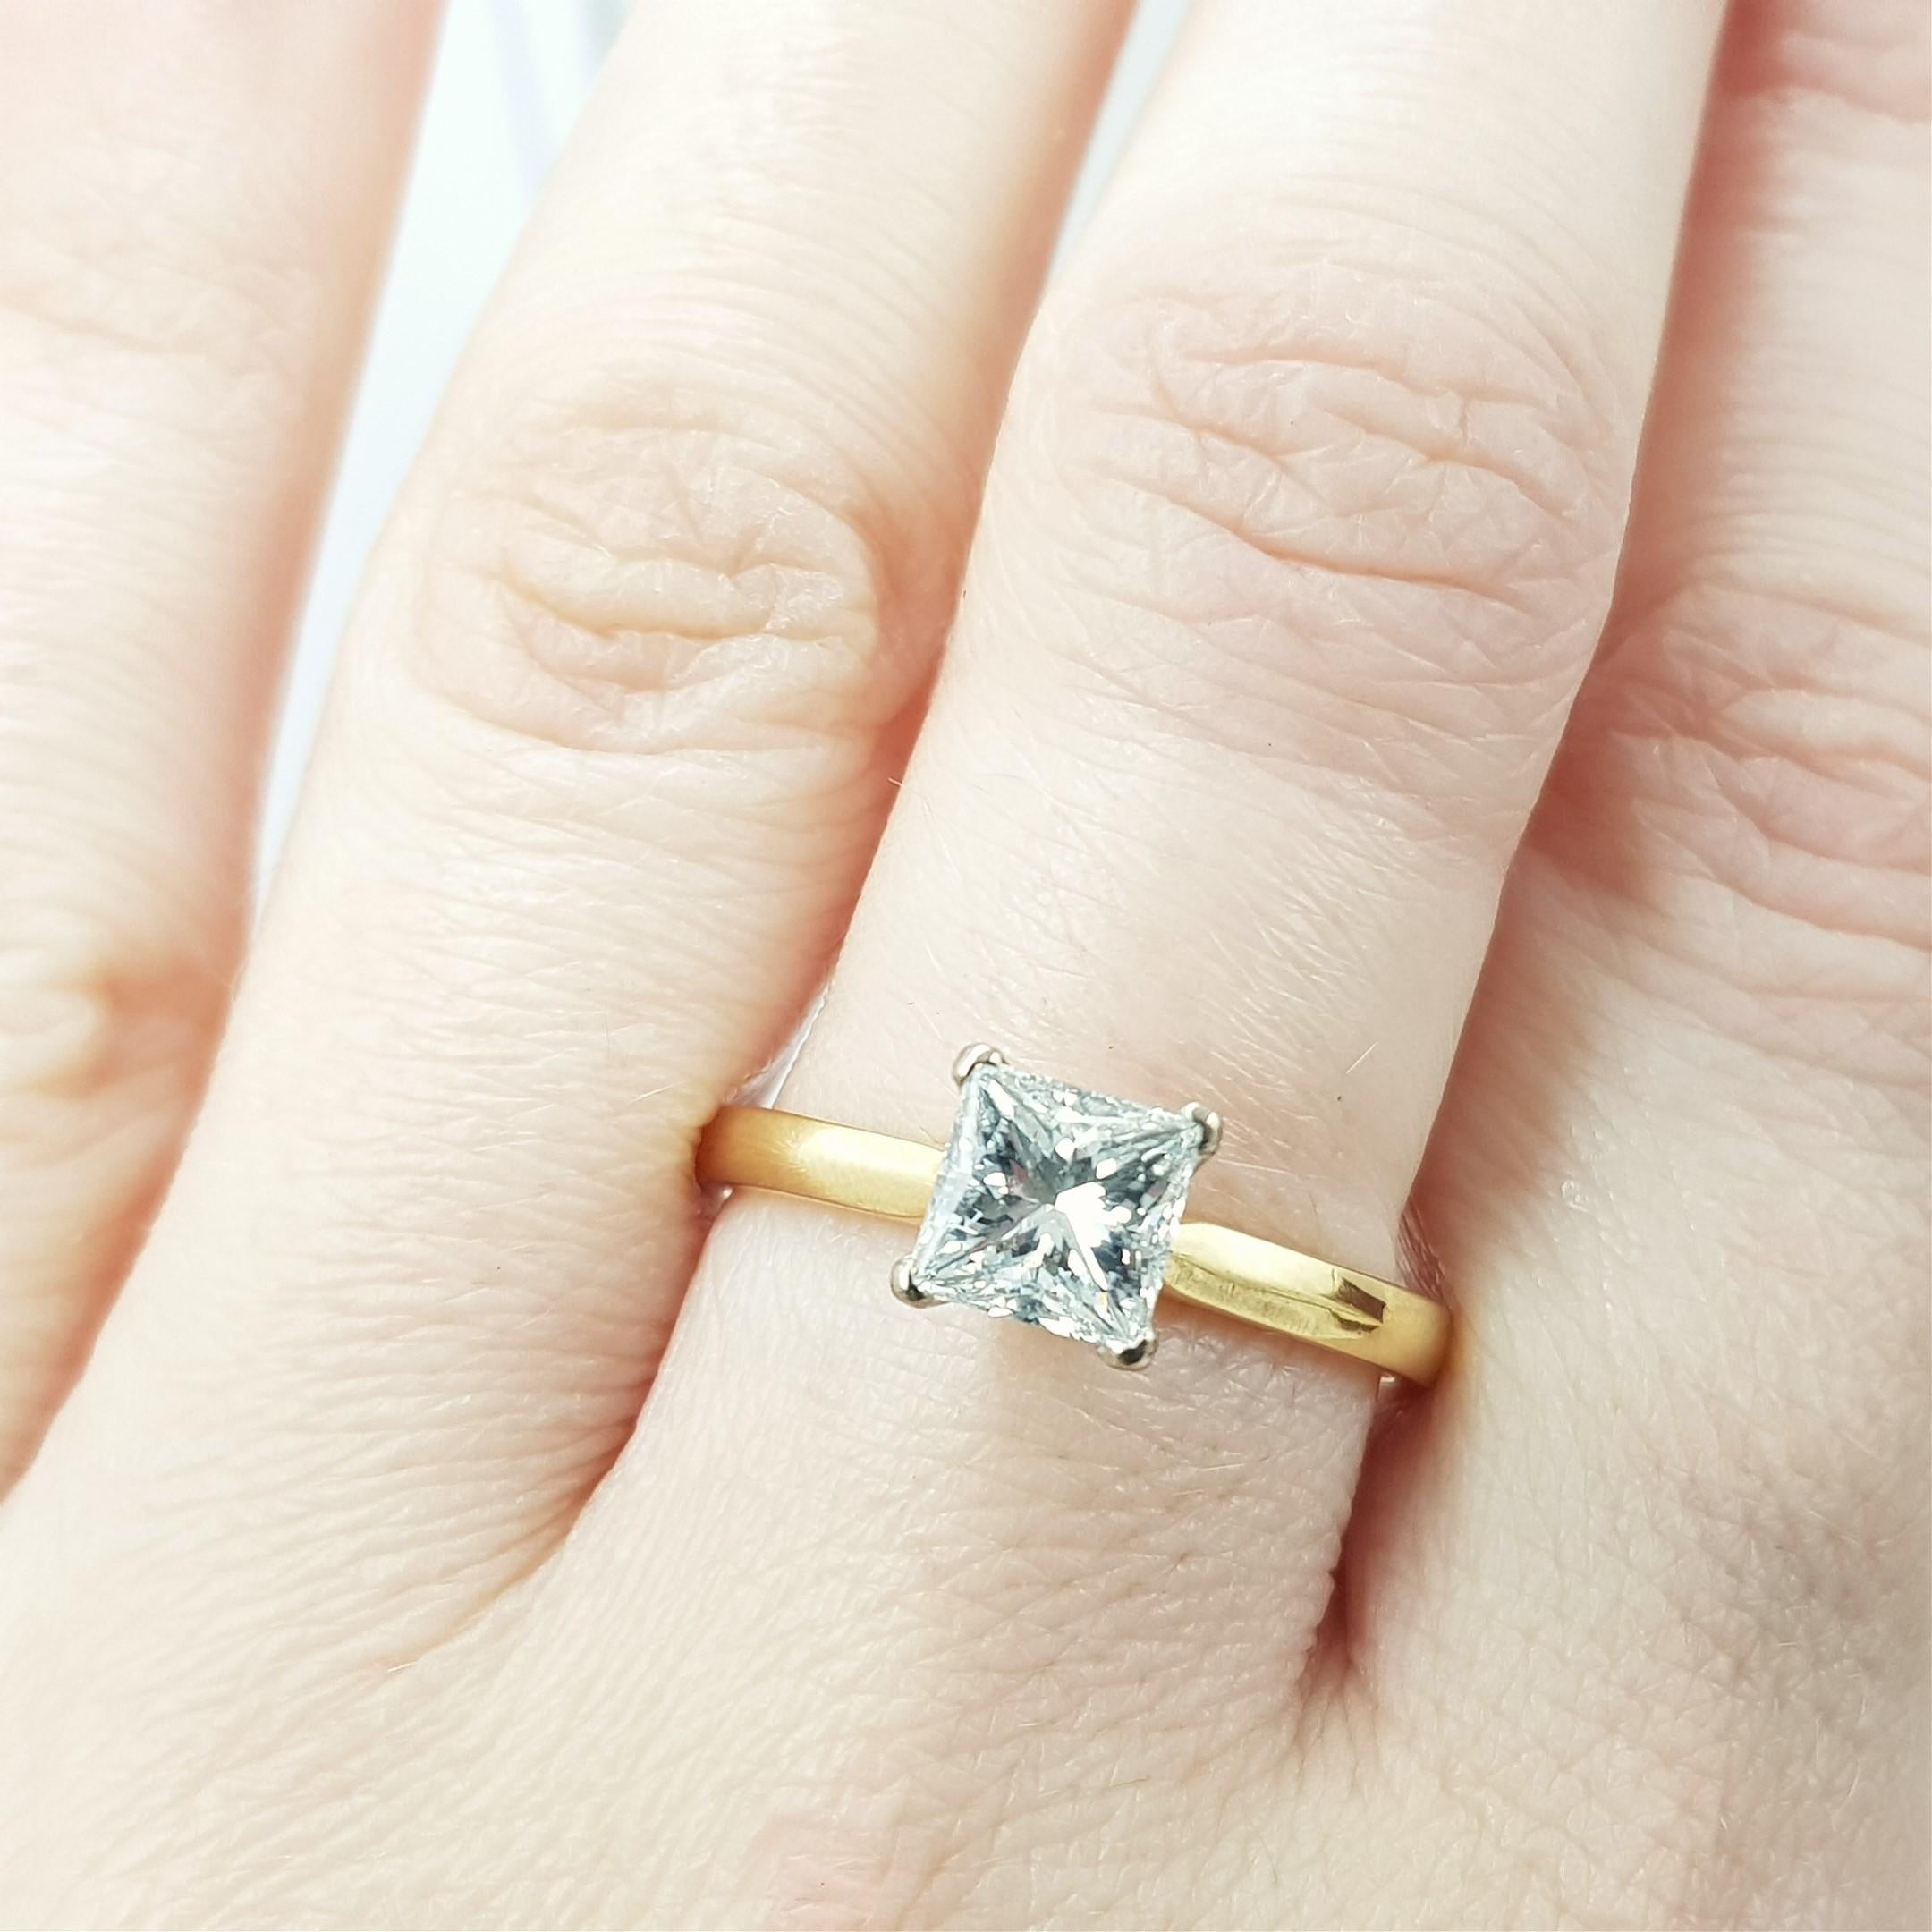 18ct Gold 1.23ct Princess Cut Solitaire Diamond Ring Size R 1/2 GIA Certified & Valuation of $26900 AUD

This 18ct gold ring has a stunning large princess cut diamond with a beautiful colour & clarity. The diamond has been GIA certified and this